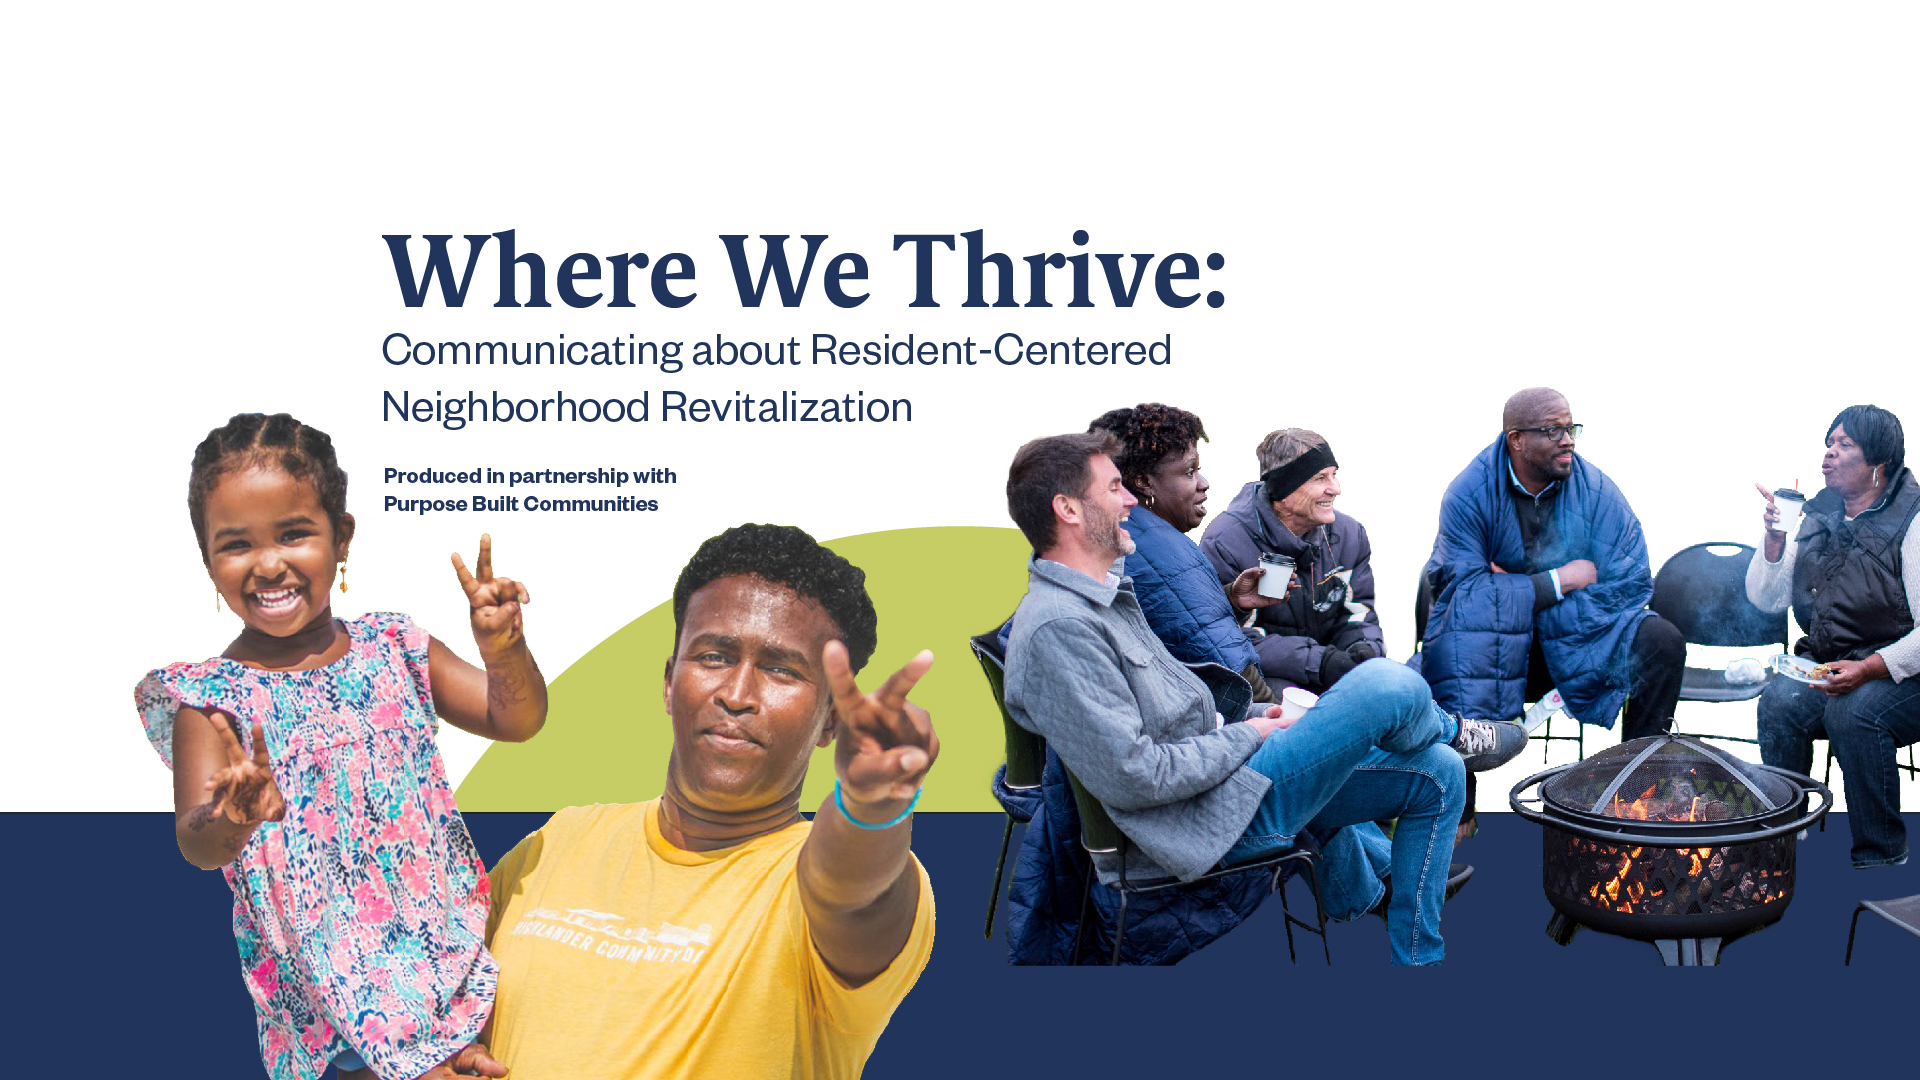 Where We Thrive: Communicating about Resident-Centered Neighborhood Revitalization